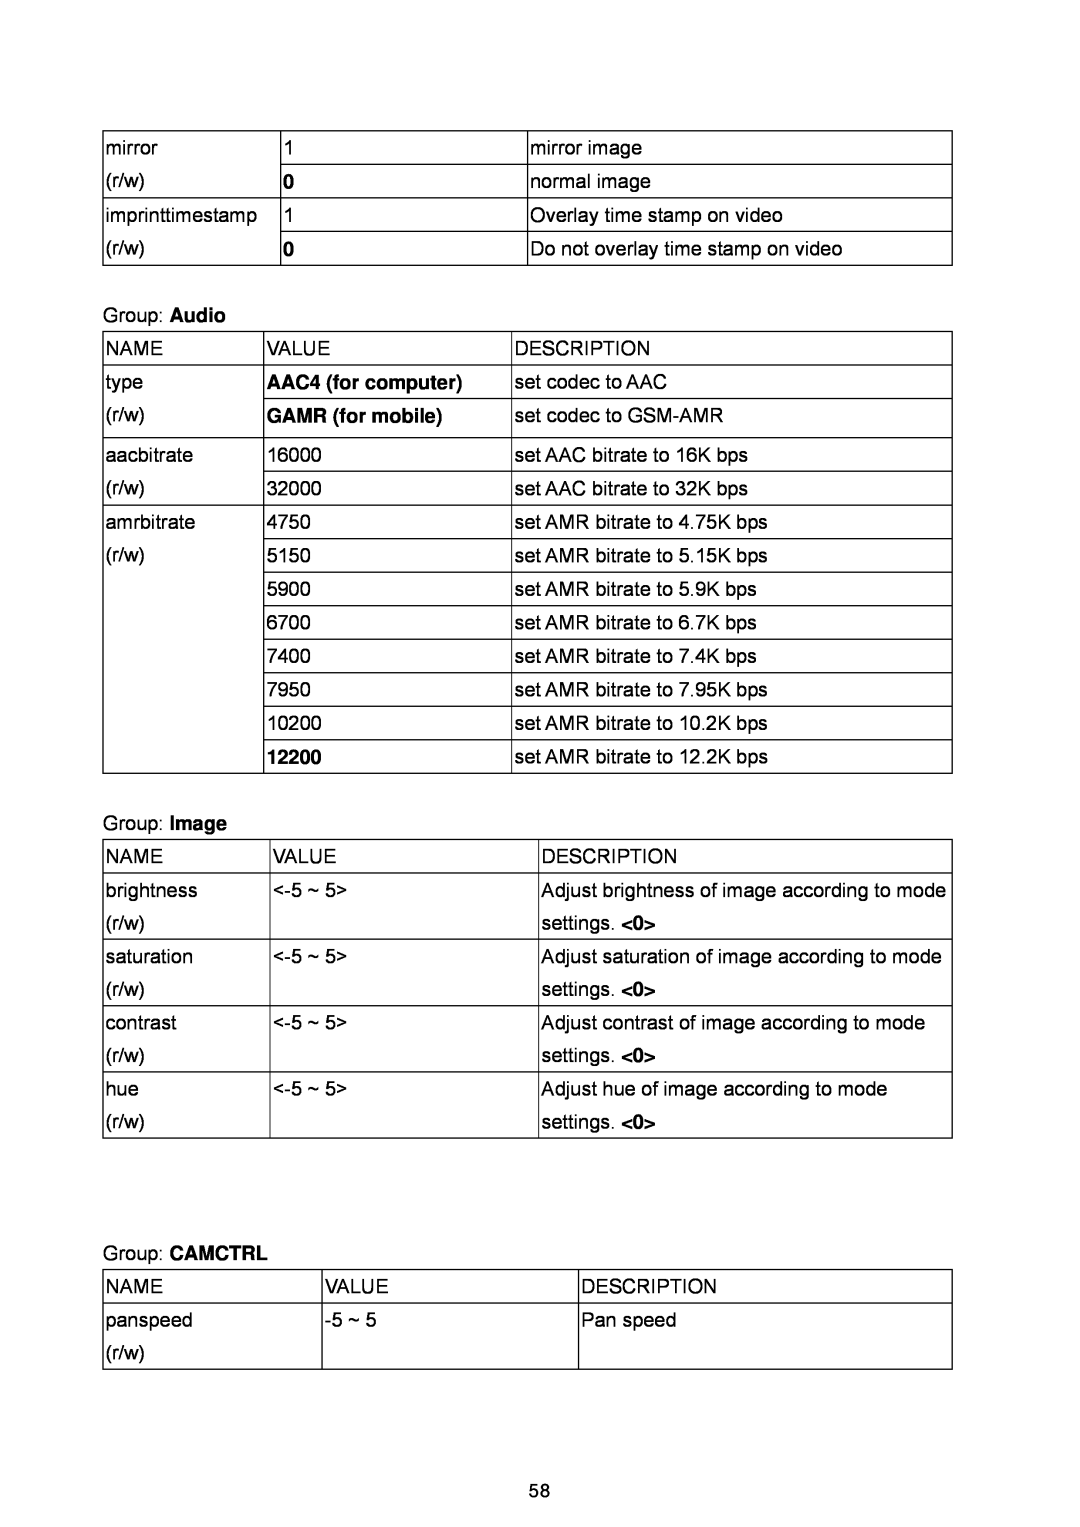 LevelOne FCS-1060, WCS-2060 user manual AAC4 for computer, GAMR for mobile, 12200 